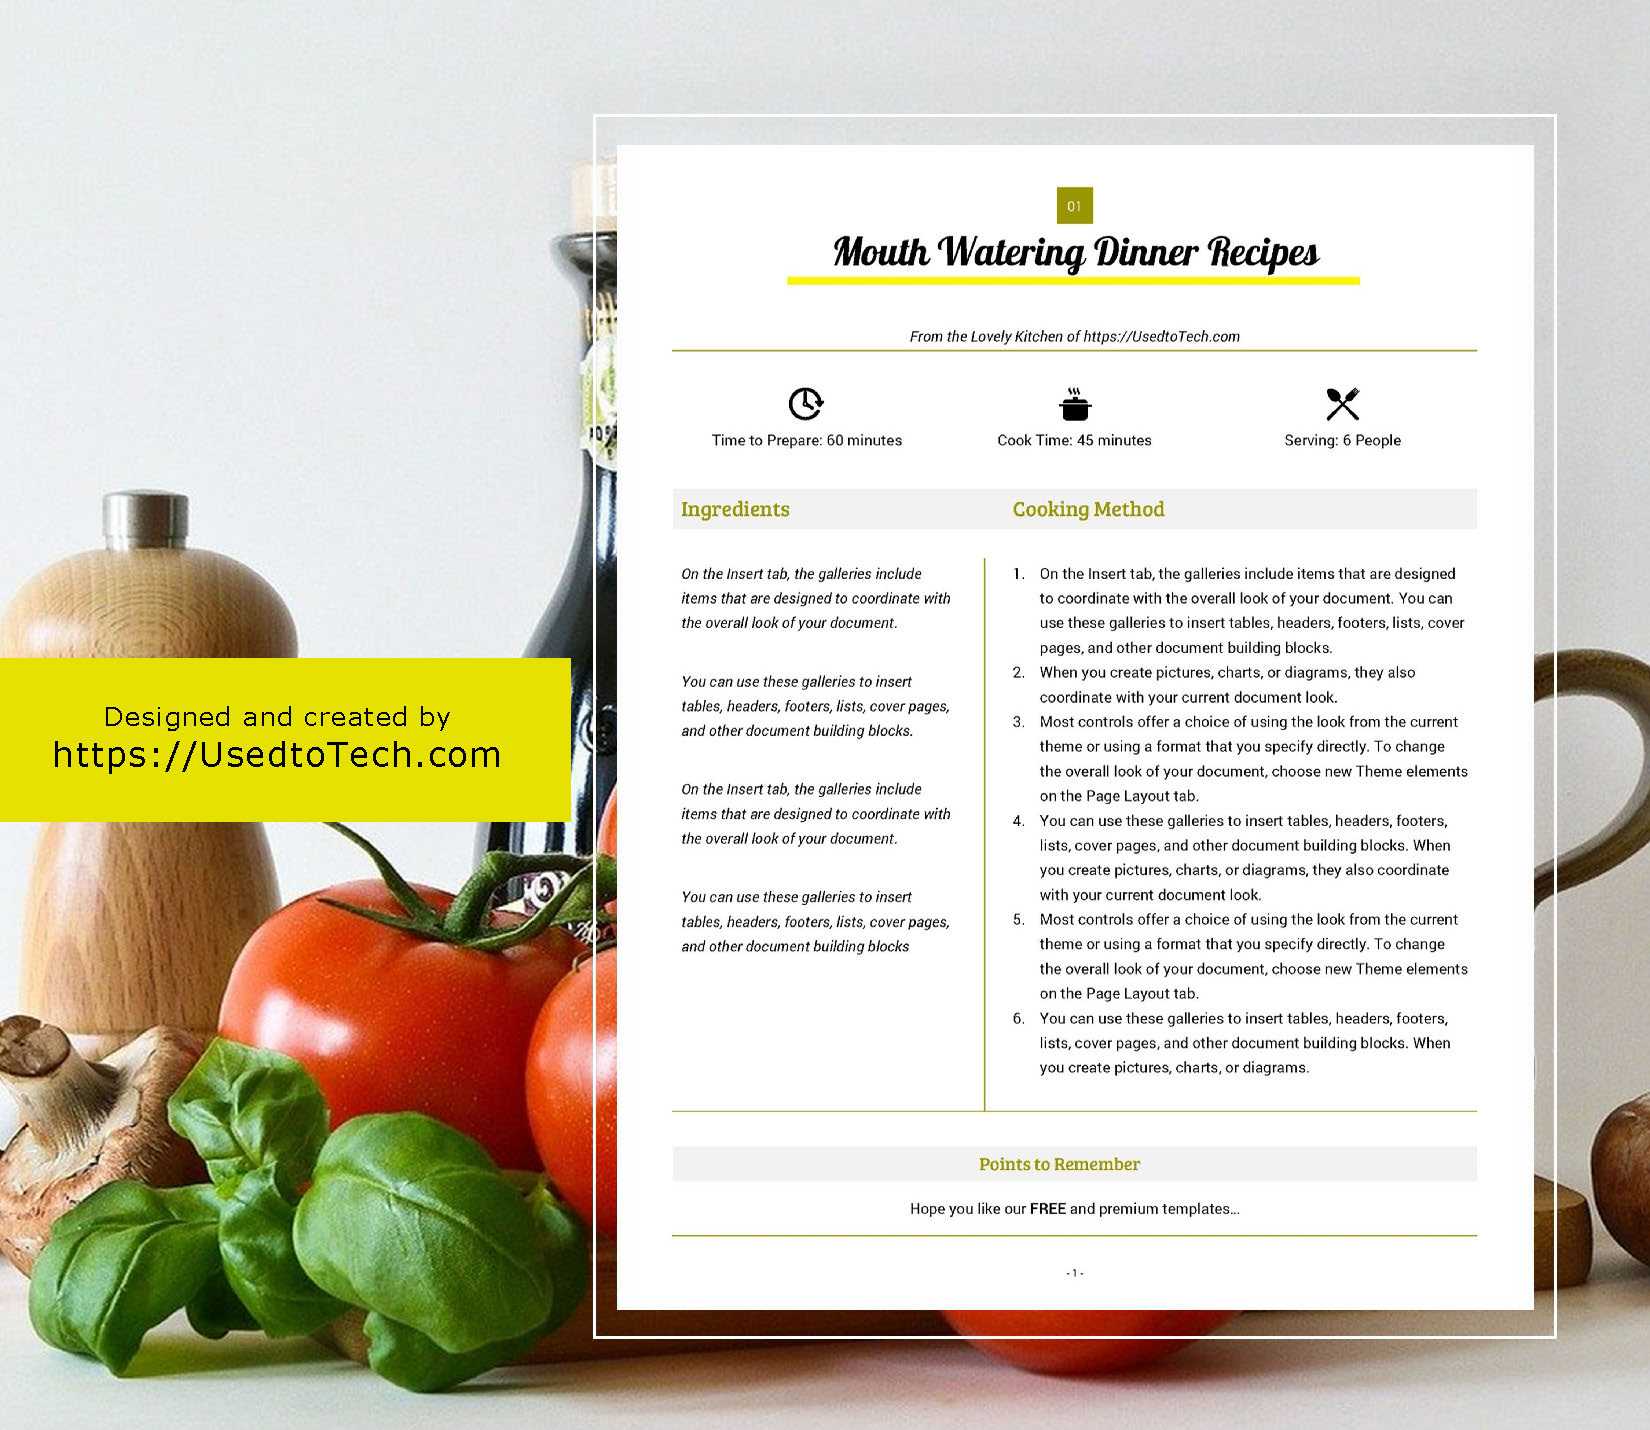 Best Looking Full Page Recipe Card In Microsoft Word – Used For Microsoft Word Recipe Card Template